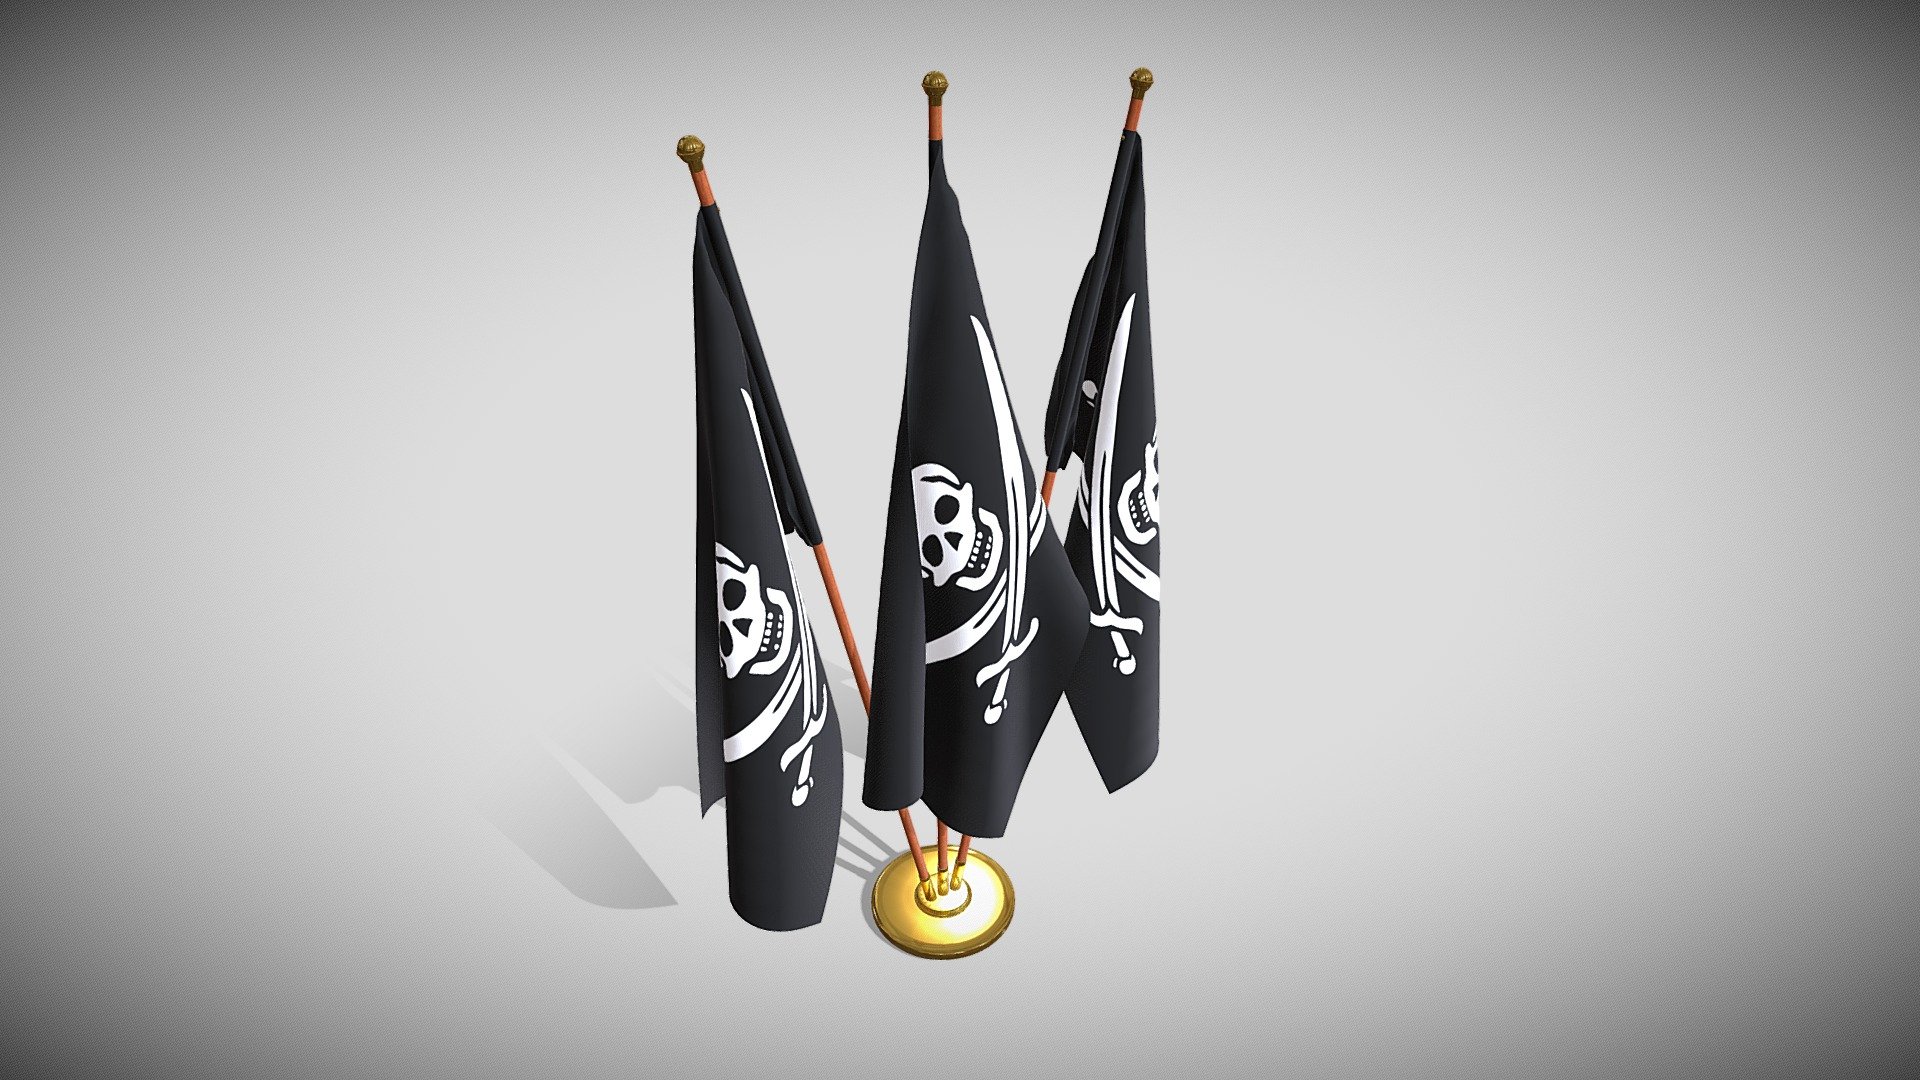 Set of four flag setups(exterior flag and three different office flags).

File formats:
-.blend, rendered with cycles, as seen in the images;
-.obj, with materials applied and textures;
-.dae, with materials applied and textures;
-.fbx, with material slots applied;
-.stl;

3D Software:
This 3d model was originally created in Blender 2.79 and rendered with Cycles.

Materials and textures:
The model has materials applied in all formats, and is ready to import and render .
The model comes with multiple png image textures.

Preview scenes:
The preview images are rendered in Blender using its built-in render engine &lsquo;Cycles'.
Note that the blend files come directly with the rendering scene included and the render command will generate the exact result as seen in previews.
The flags are on different layer each for convenience.
For each format there are separate files for each of the four flag setups 3d model